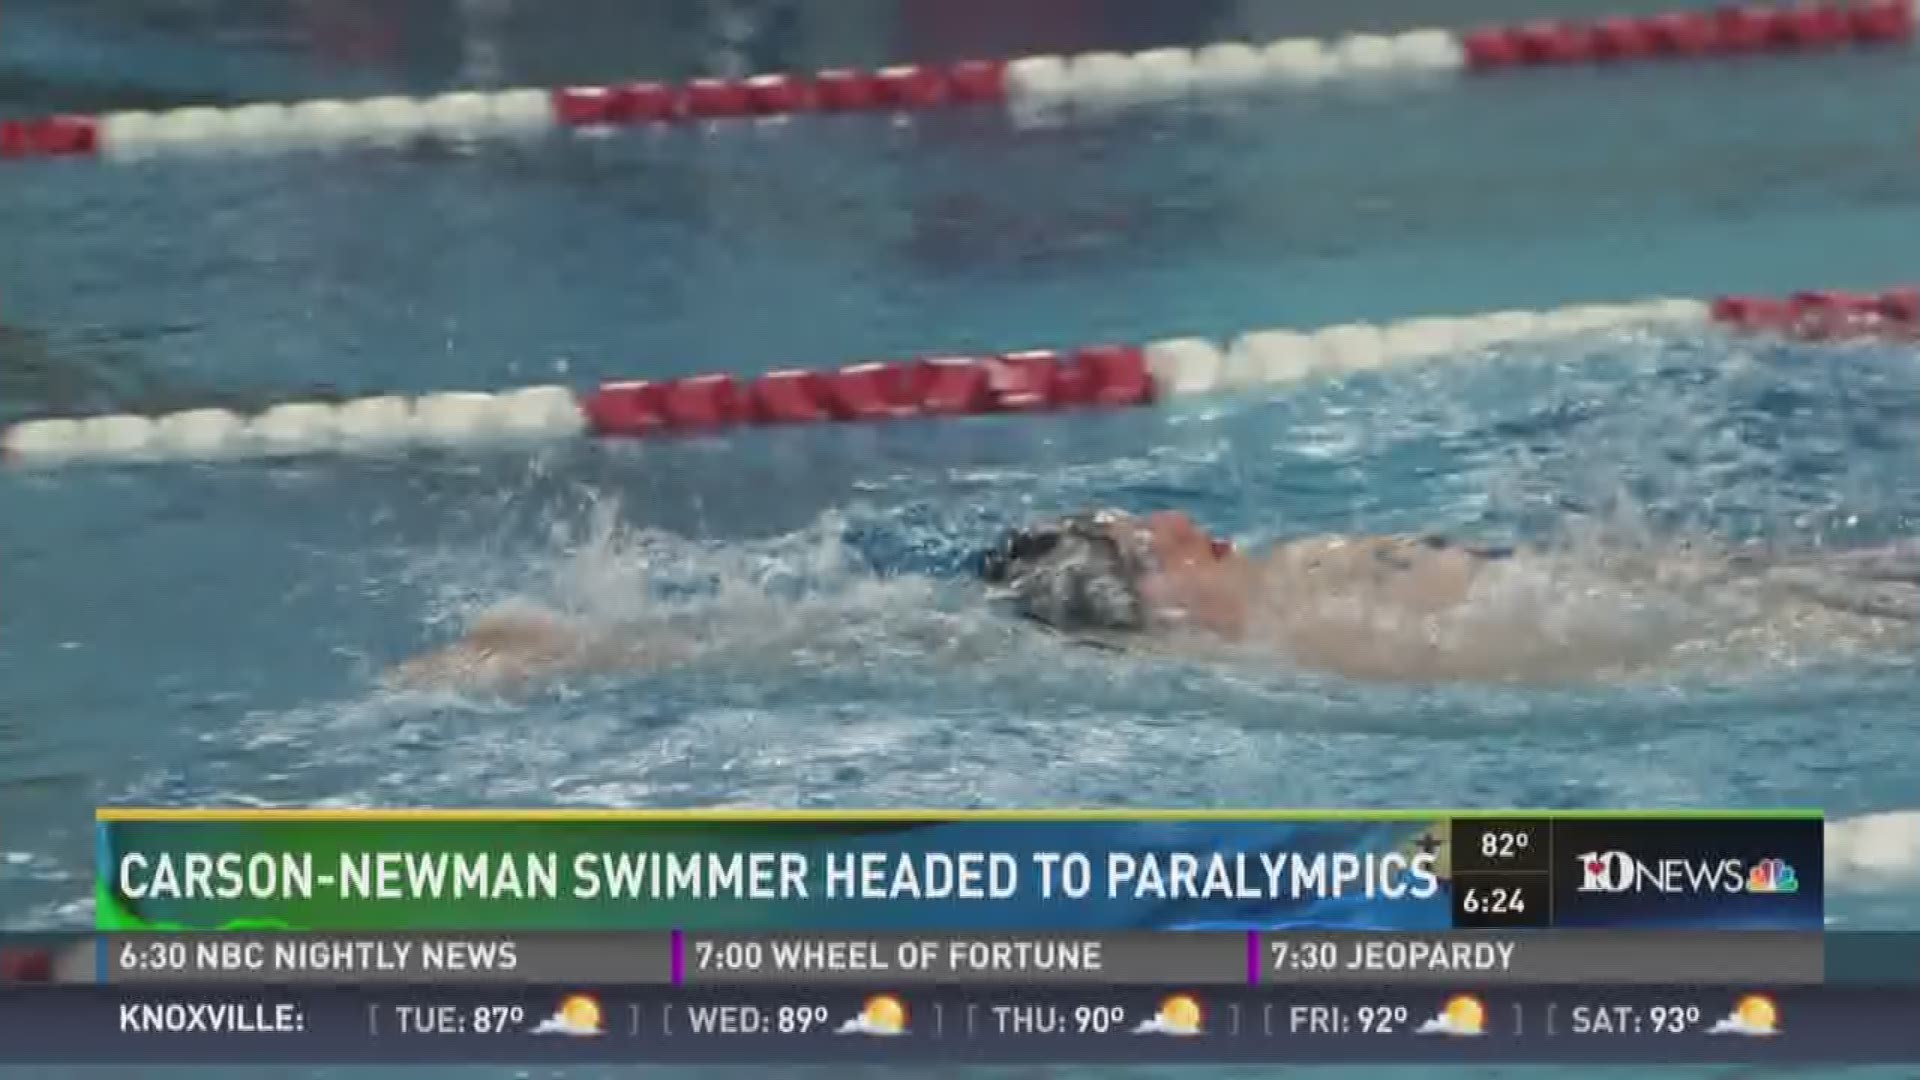 Robert Griswald, a swimmer at Carson-Newman University, is swimming in multiple events at the Paralympic Games in Rio de Janeiro in September.